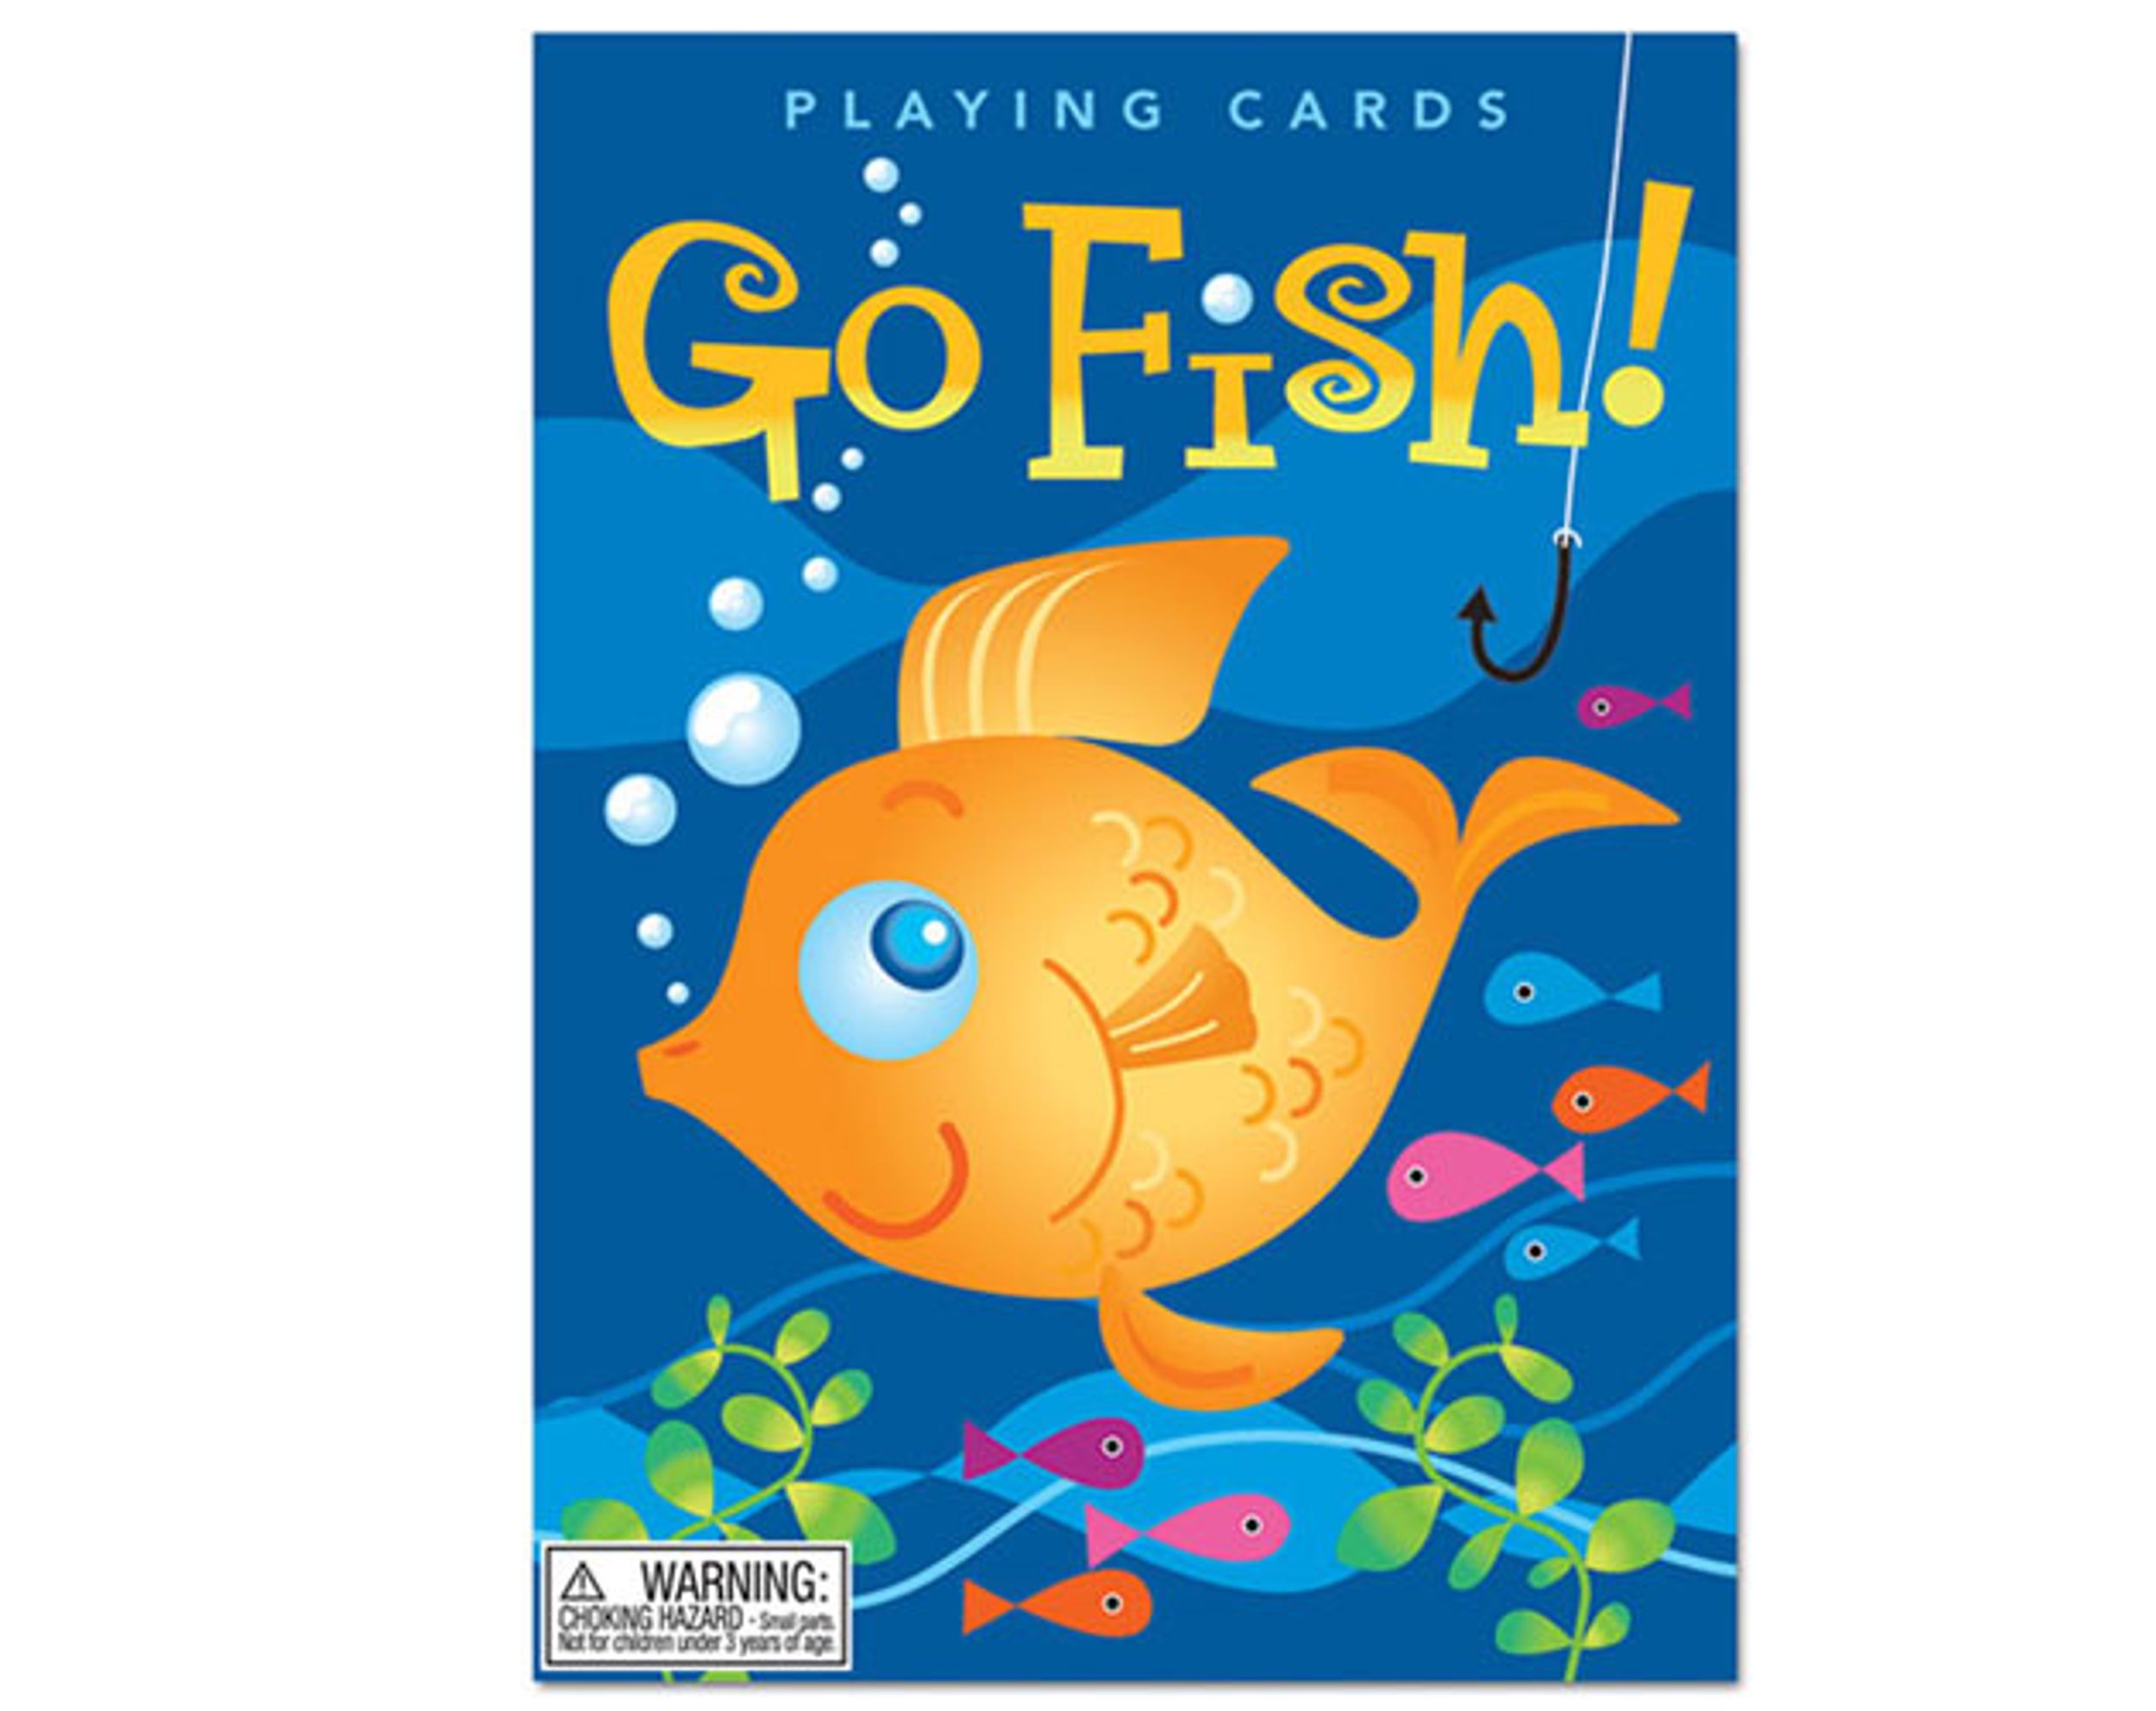 Get Your Ear Ready for the “Go Fish” Gigs